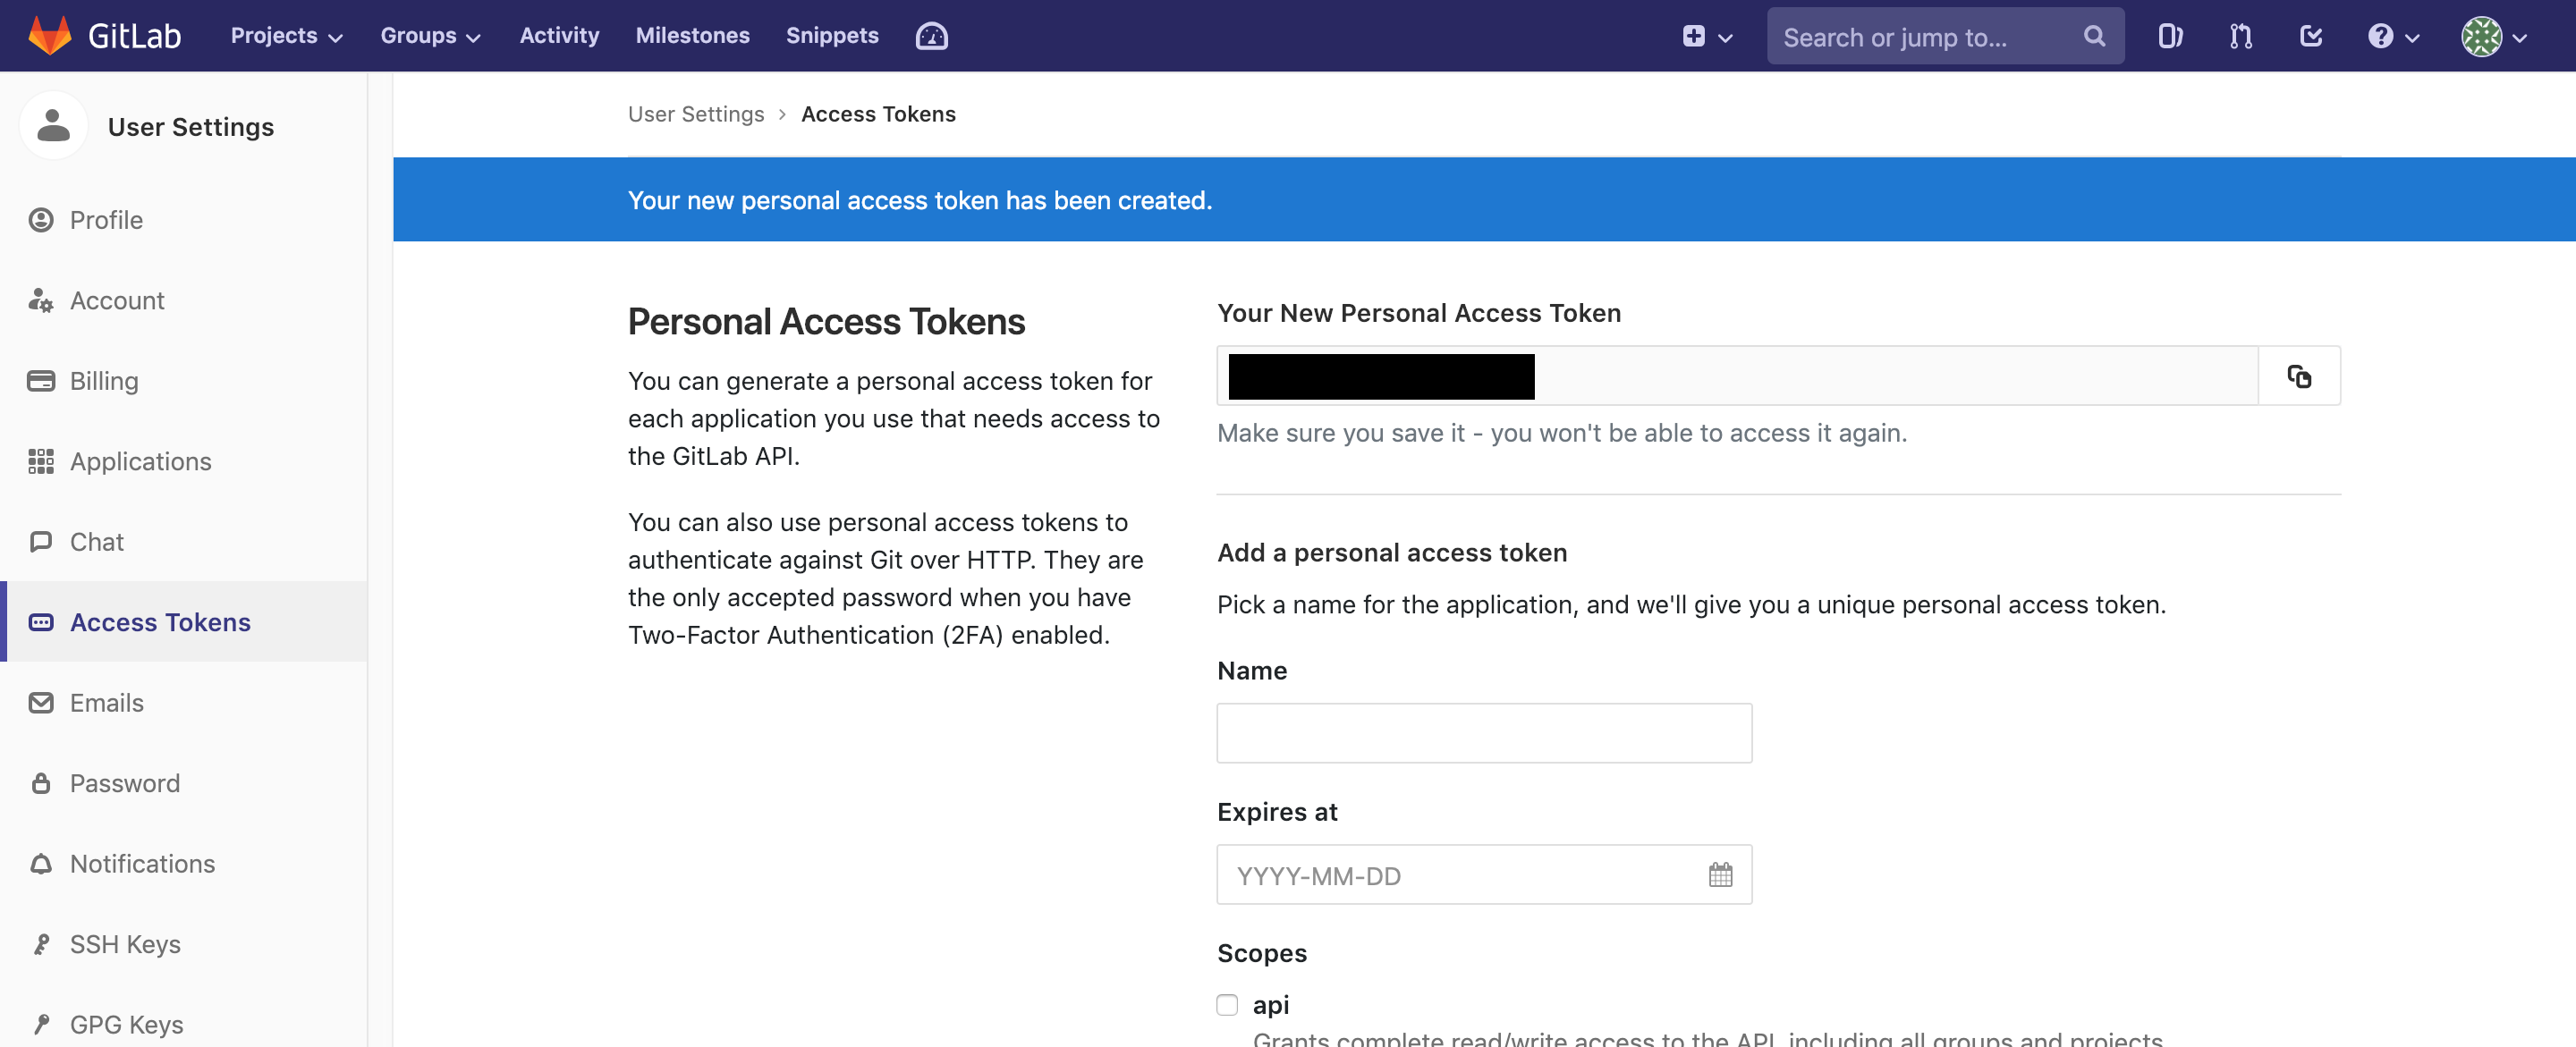 screencapture-gitlab-profile-personal_access_tokens-2019-01-16-05_47_29.png